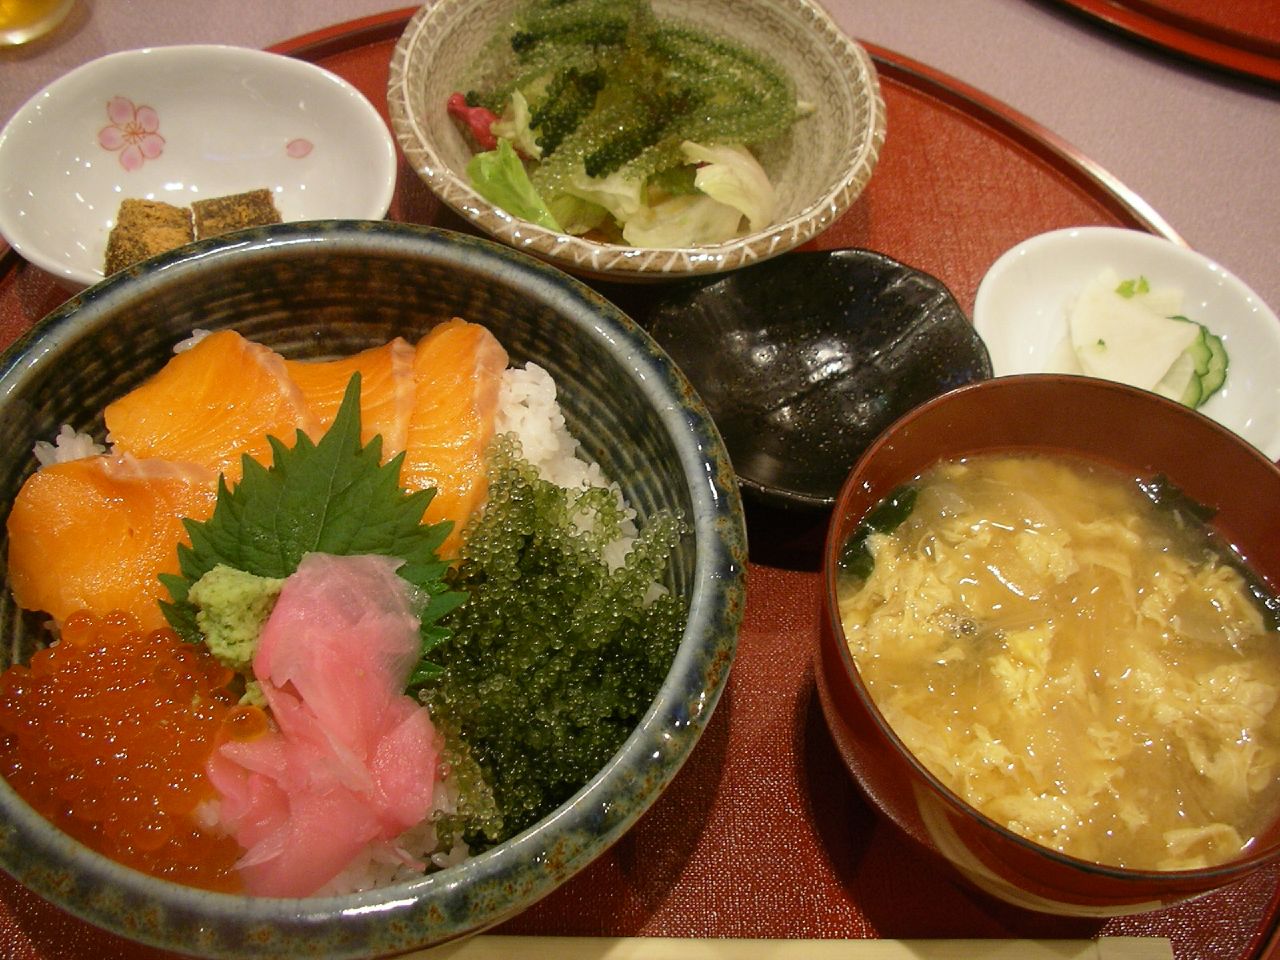 various bowls of food are set out on the table